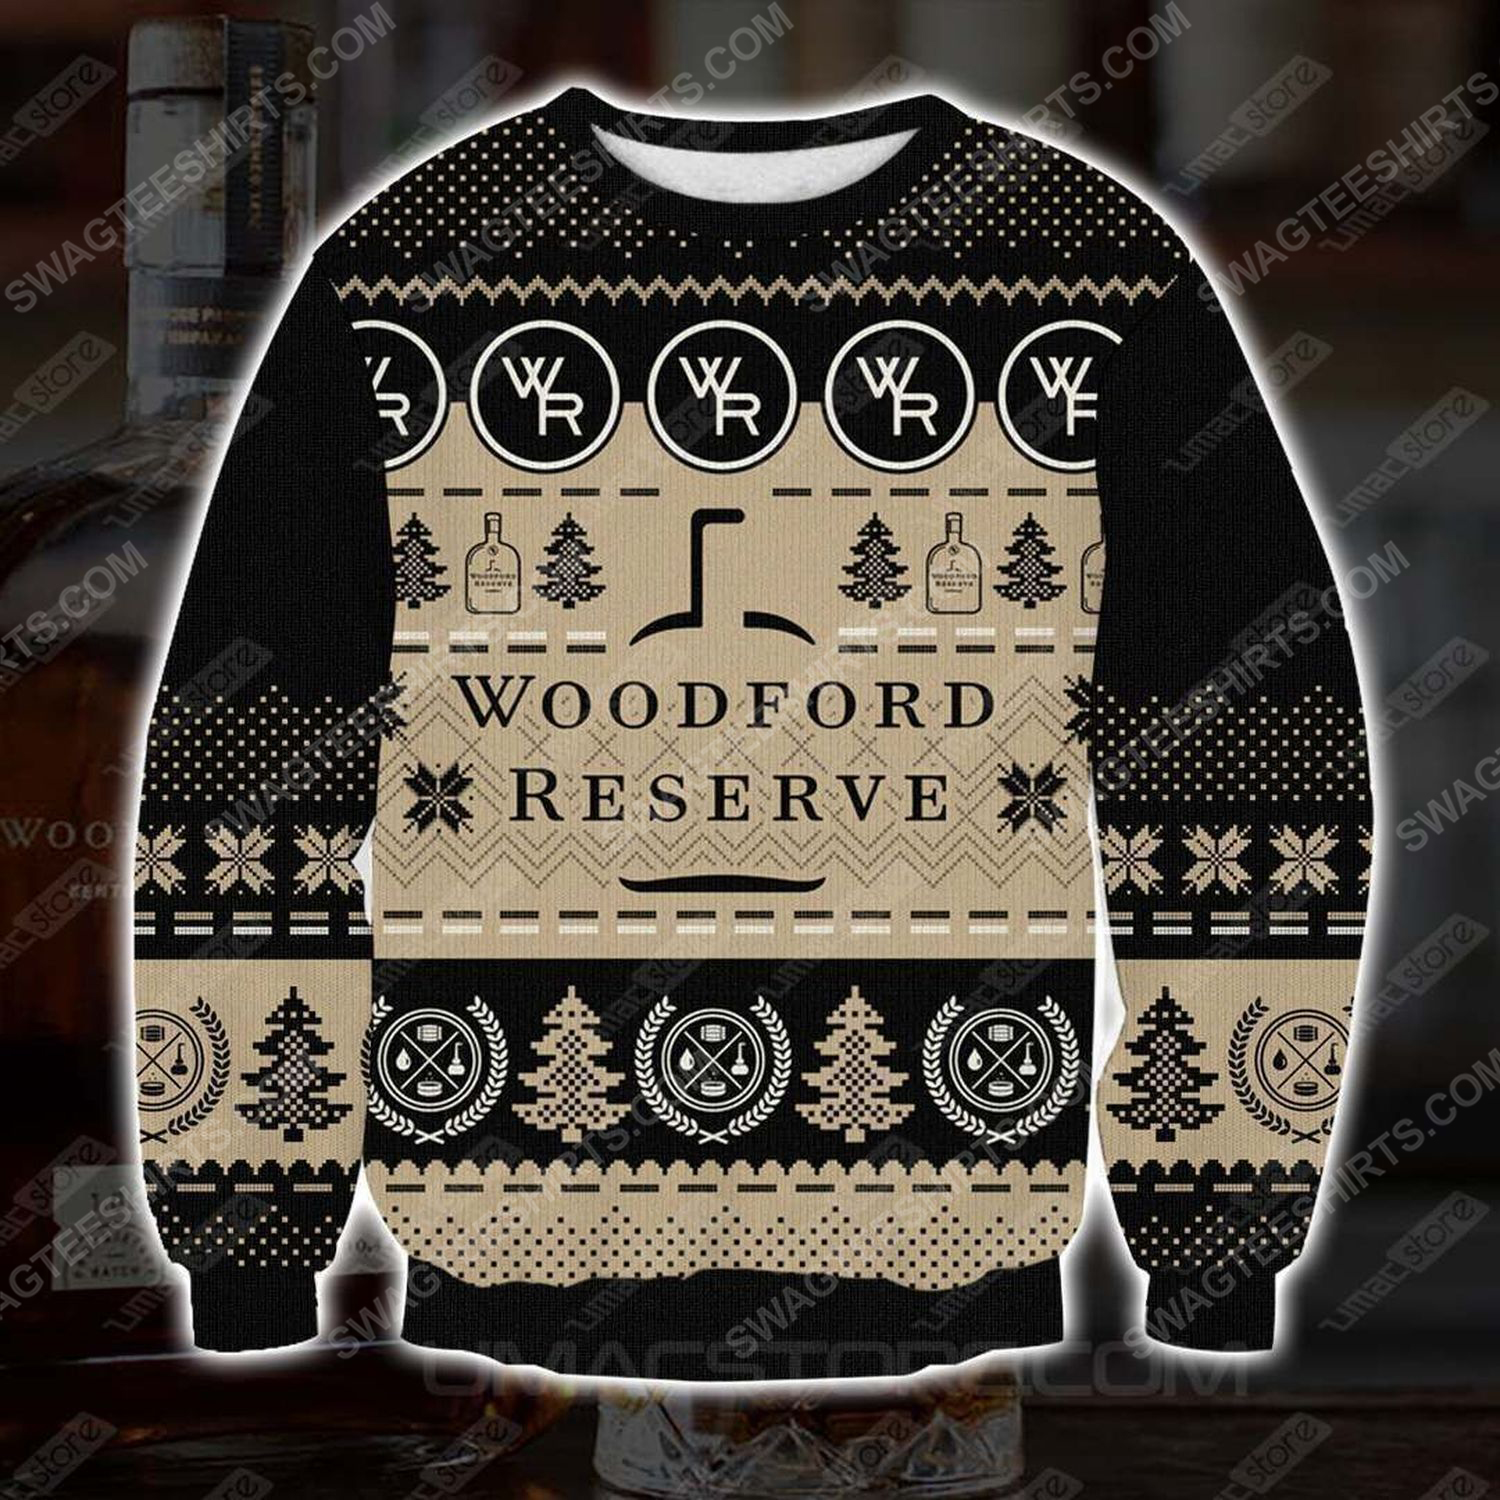 Woodford reserve bourbon whiskey ugly christmas sweater - Copy (2)